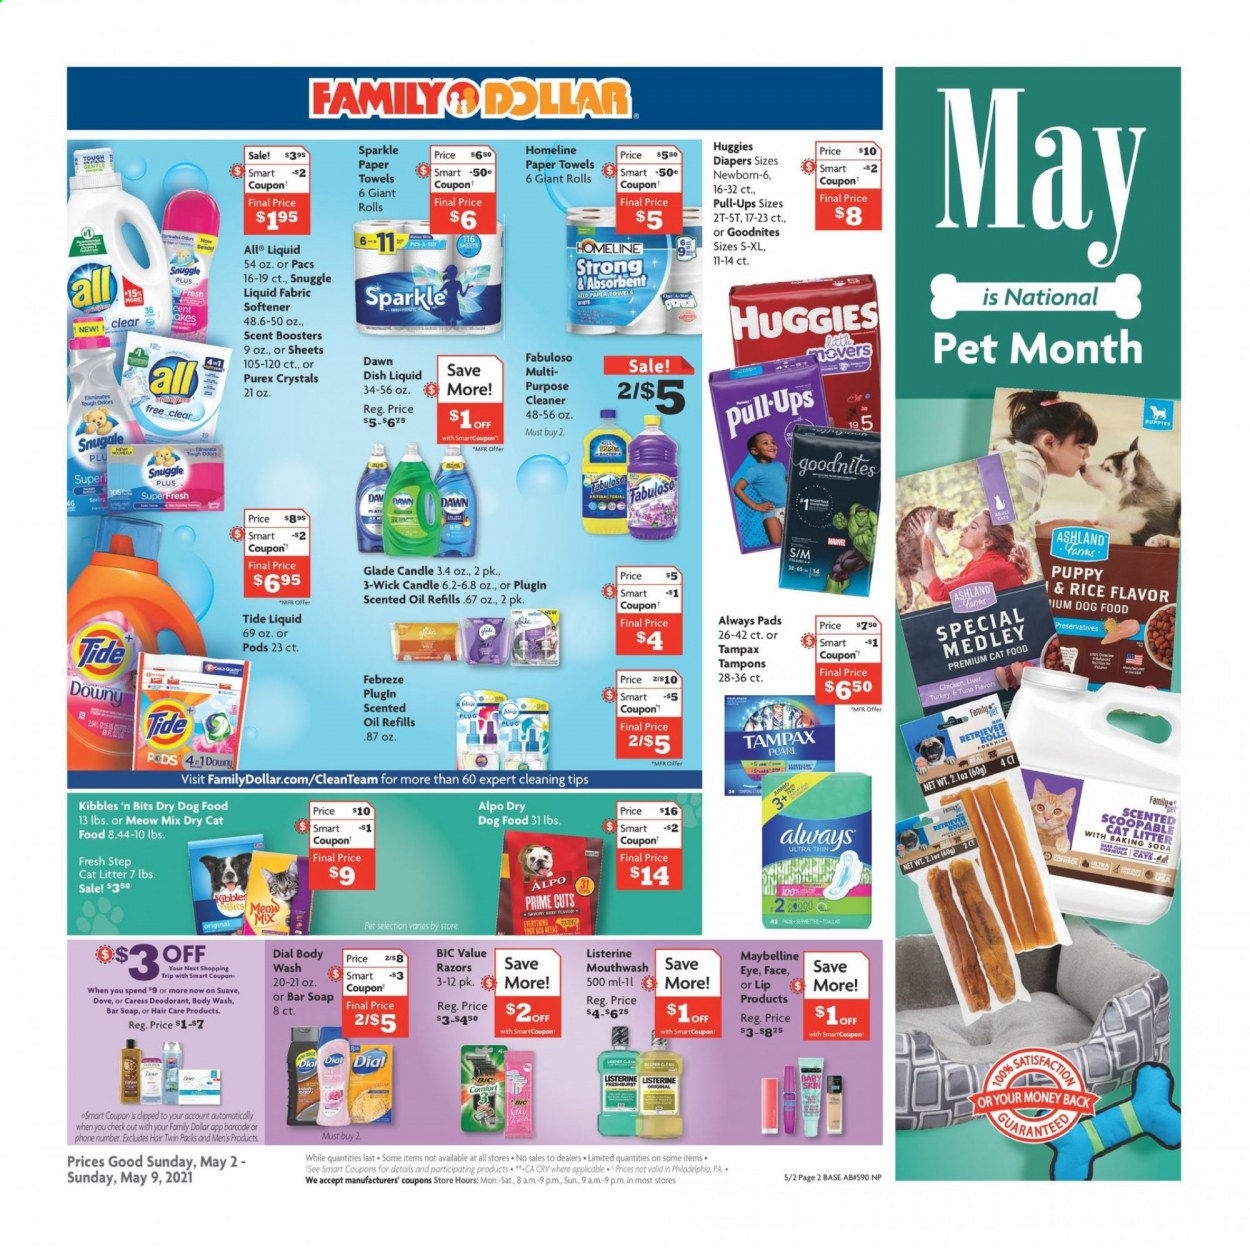 thumbnail - Family Dollar Flyer - 05/02/2021 - 05/09/2021 - Sales products - bicarbonate of soda, rice, oil, Huggies, nappies, Dove, kitchen towels, paper towels, Febreze, cleaner, Fabuloso, Snuggle, Tide, fabric softener, scent booster, Purex, dishwashing liquid, body wash, Suave, soap bar, Dial, soap, Listerine, mouthwash, Tampax, Always pads, tampons, anti-perspirant, deodorant, BIC, Maybelline, candle, Glade, scented oil, cat litter, animal food, cat food, dog food, dry dog food, dry cat food, Meow Mix, Fresh Step, Alpo. Page 3.